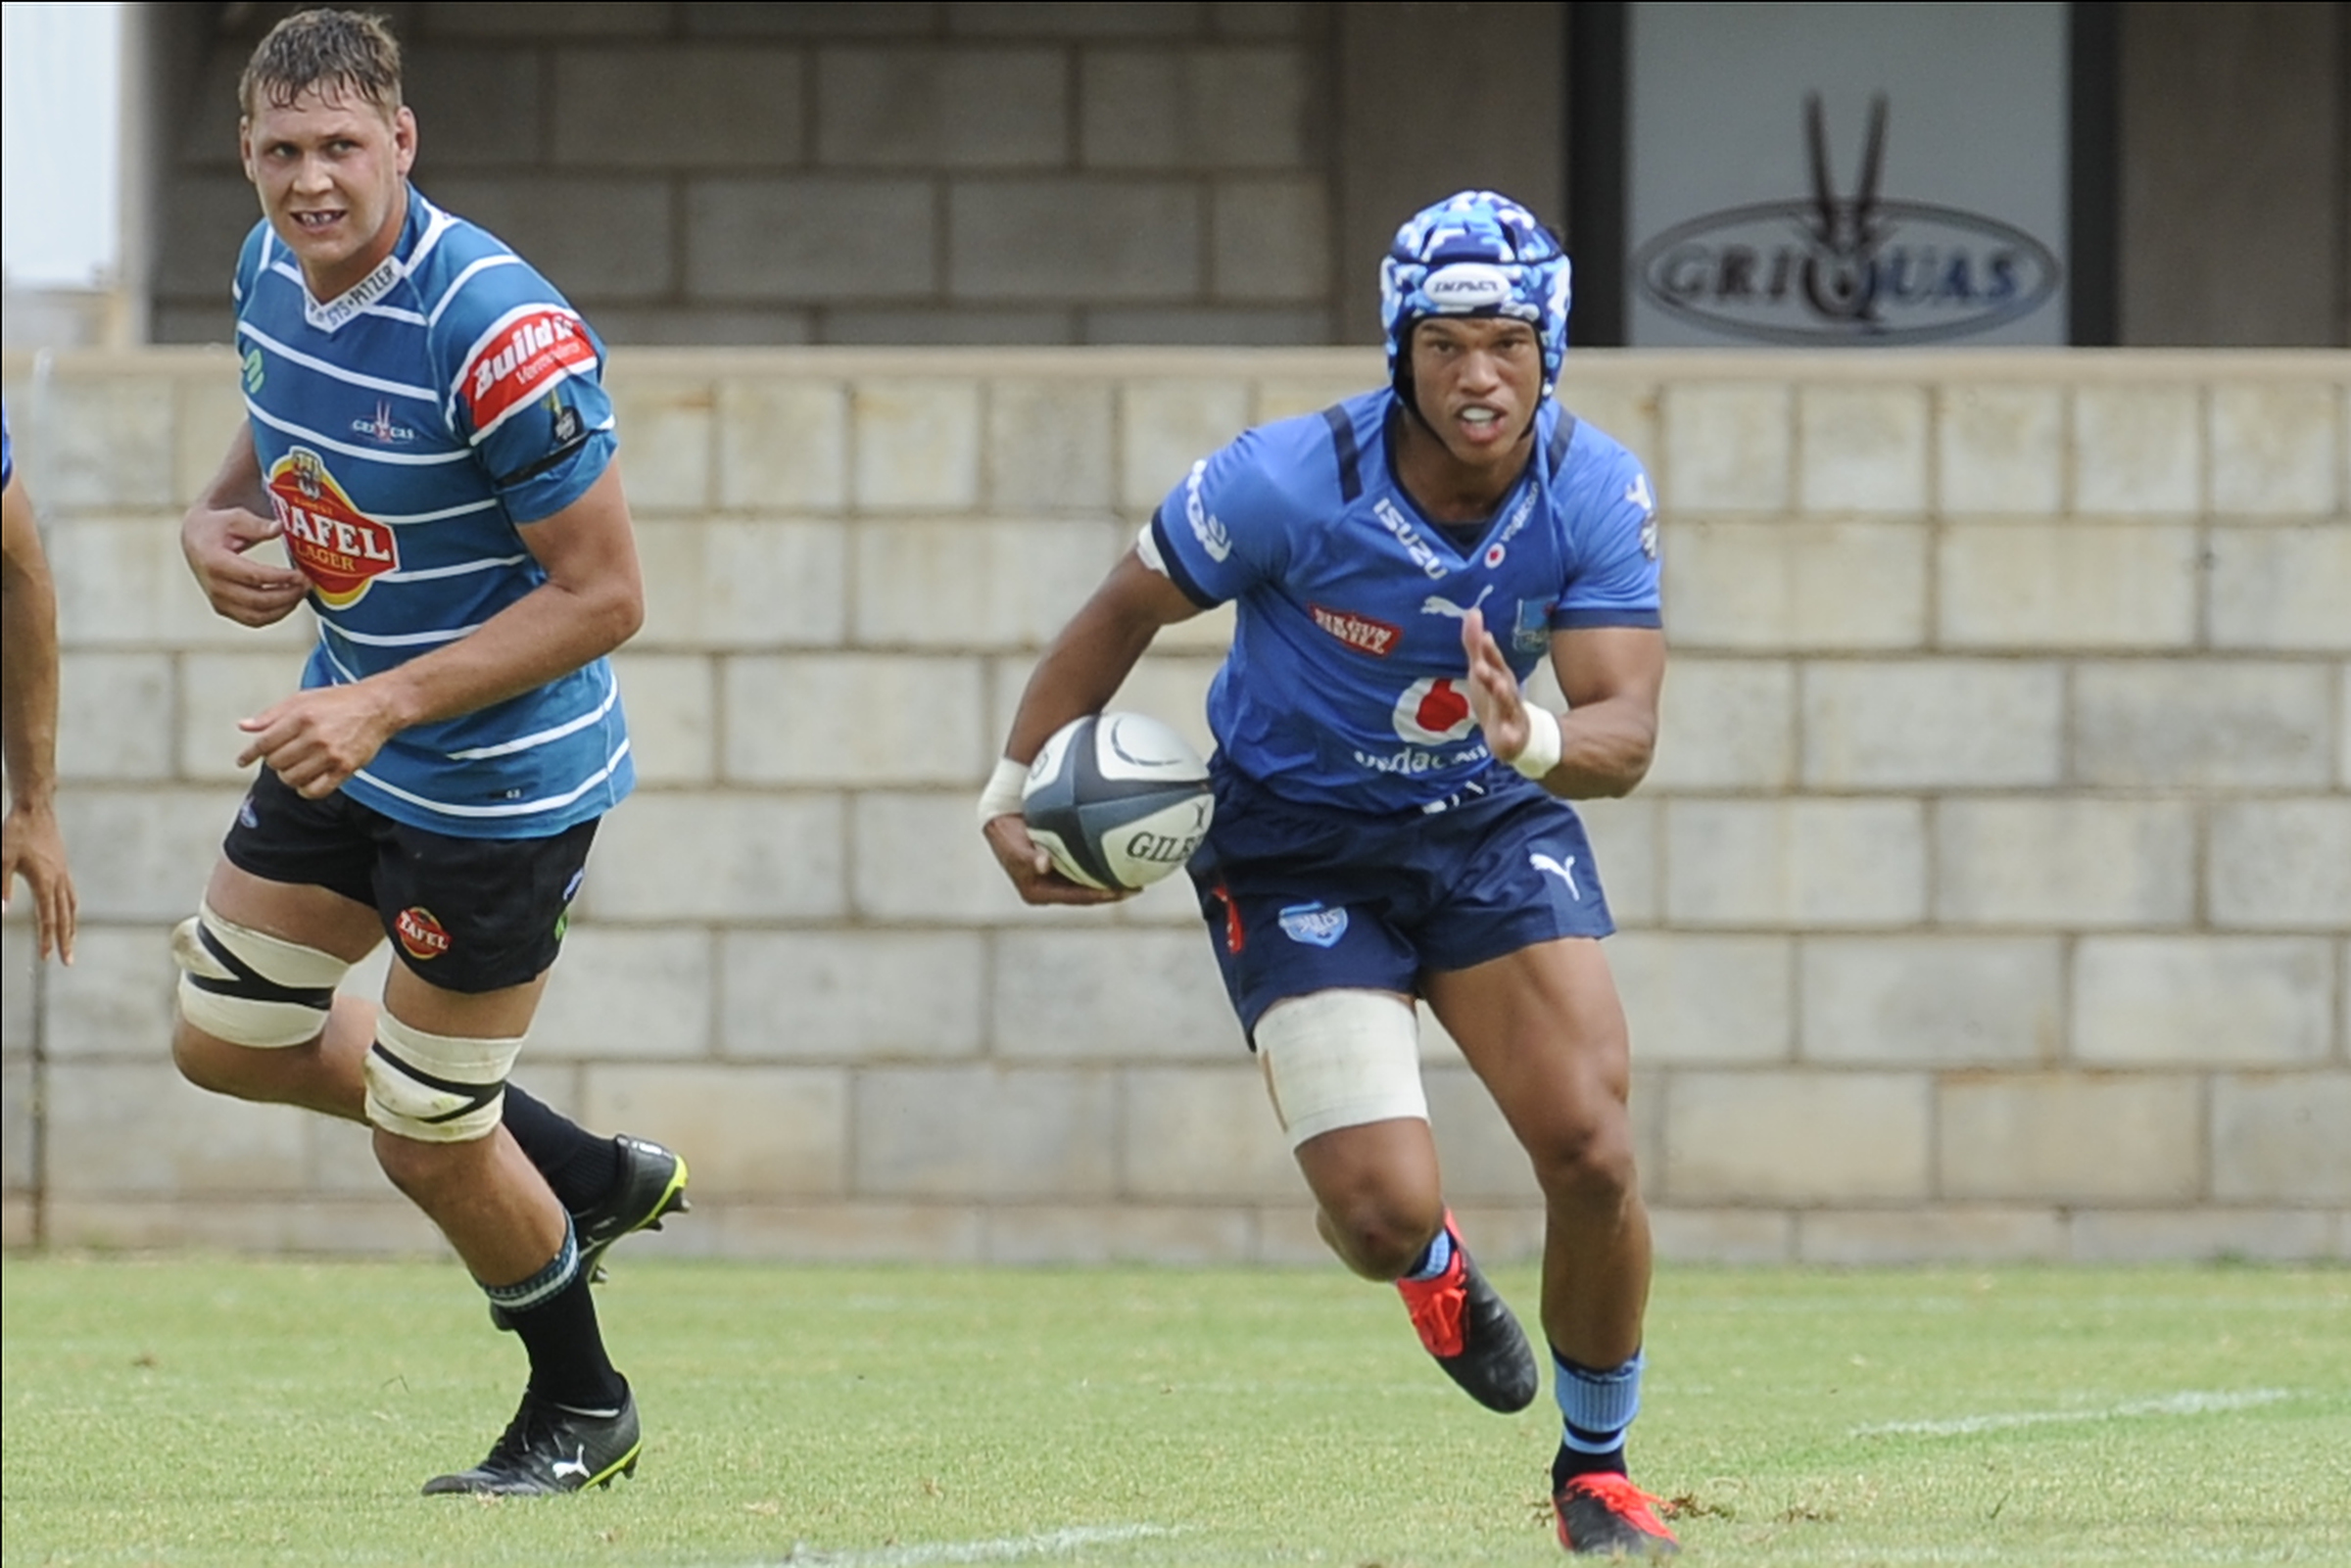 KIMBERLEY, SOUTH AFRICA - MARCH 05: Kurt-Lee Arendse of the Vodacom Bulls during the Carling Currie Cup match between Tafel Lager Griquas and Vodacom Bulls at Tafel Lager Park on March 05, 2022 in Kimberley, South Africa. (Photo by Charle Lombard/Gallo Images/BackpagePix)